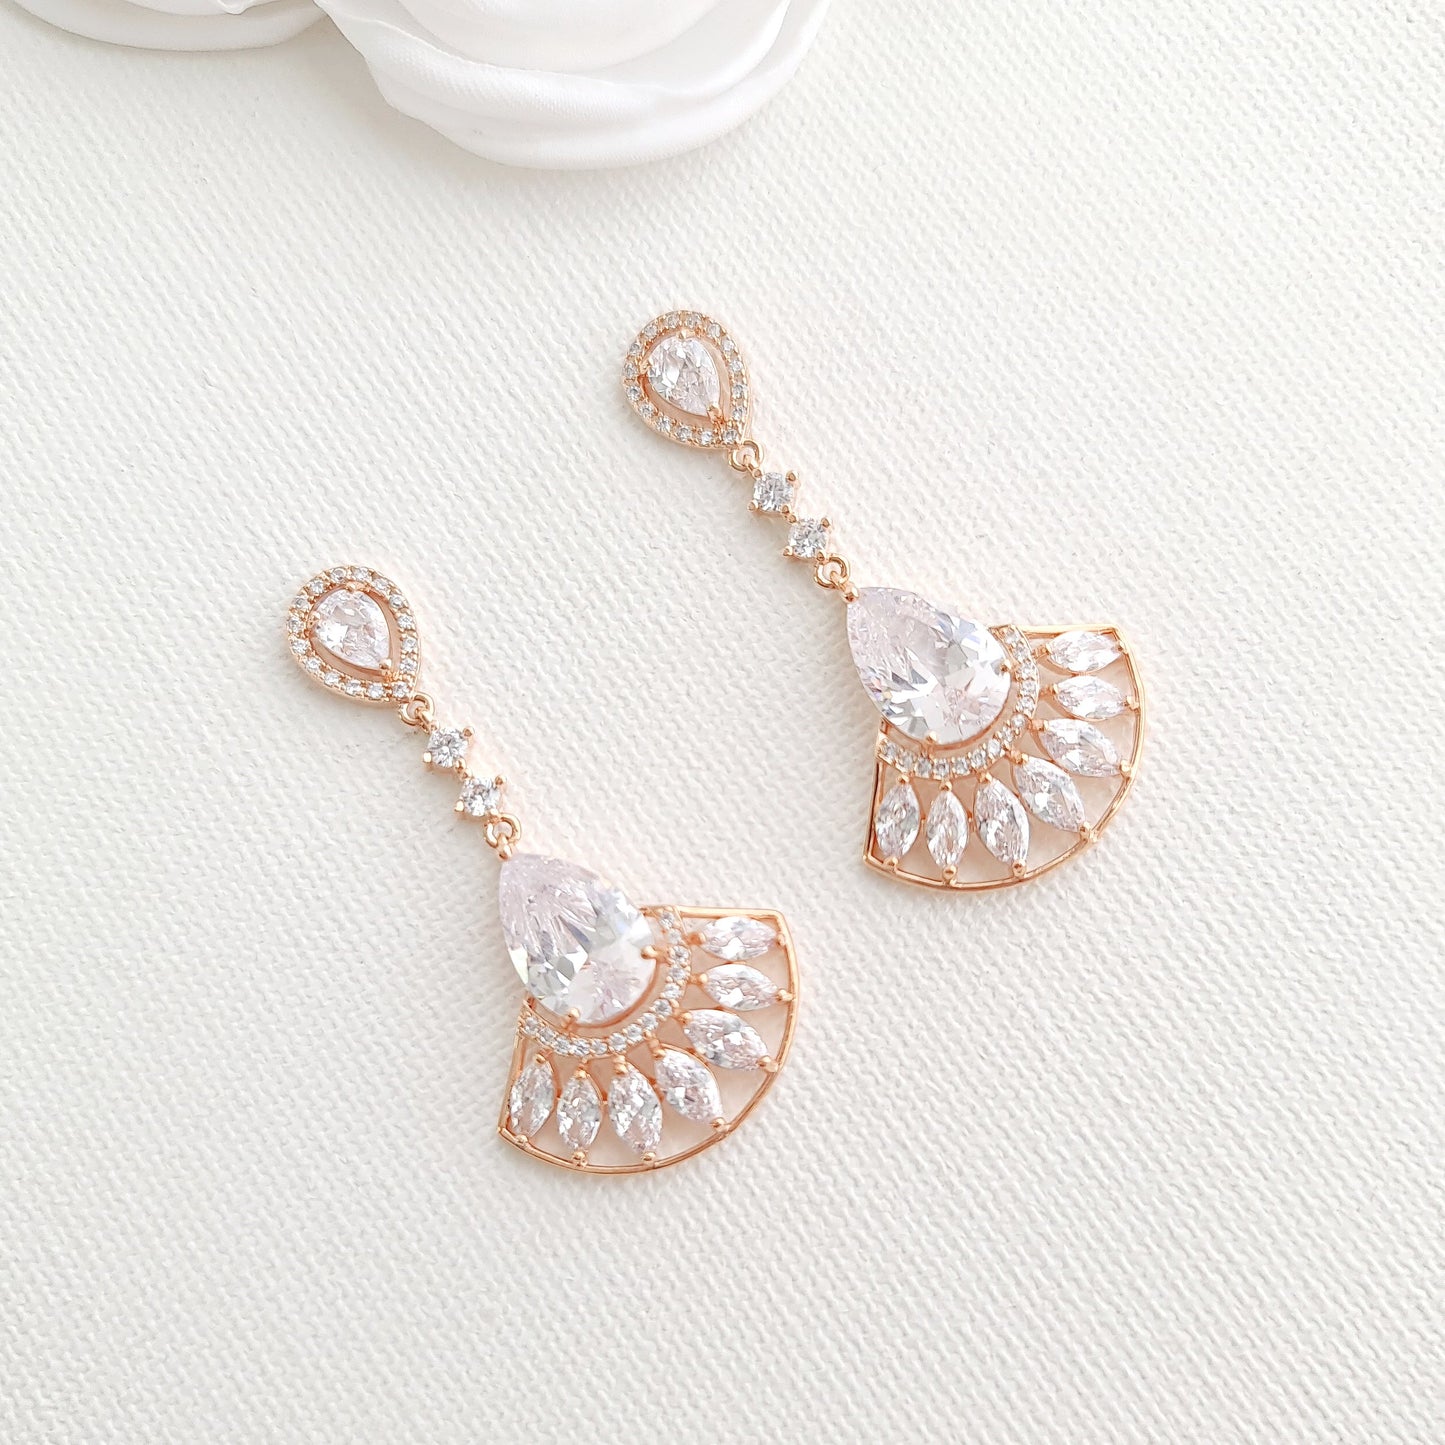 Rose Gold Earrings for Formal Events-Ilana